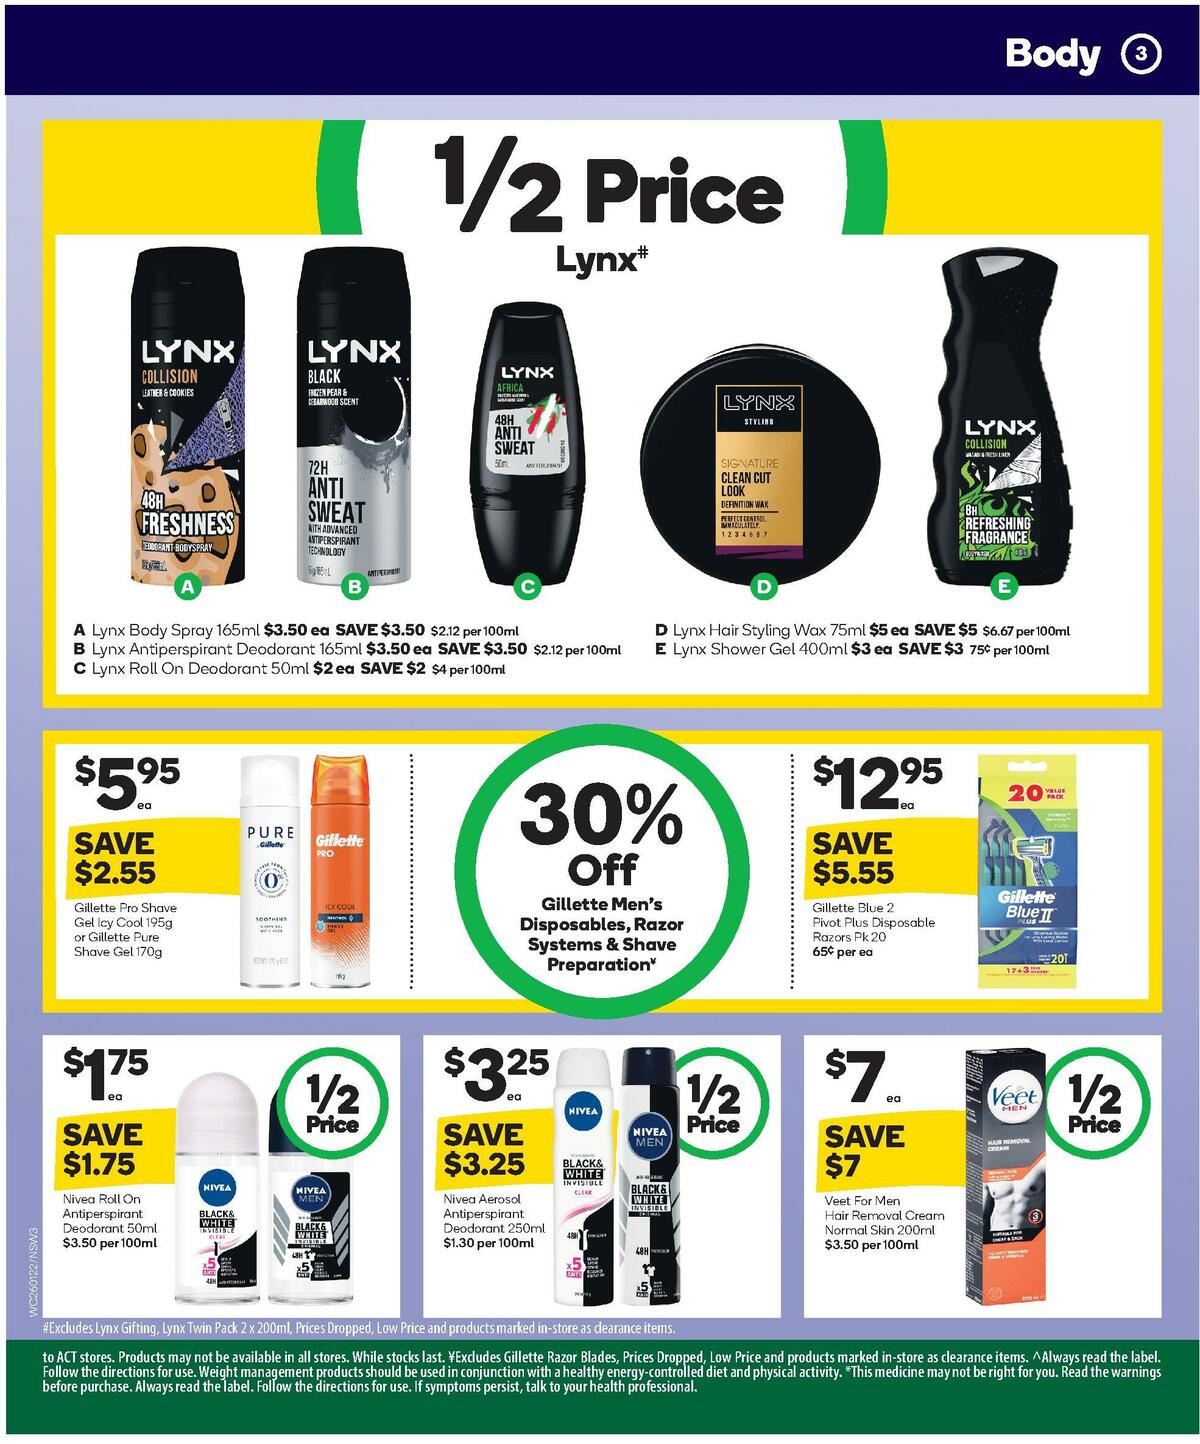 Woolworths Health & Beauty Catalogues from 26 January